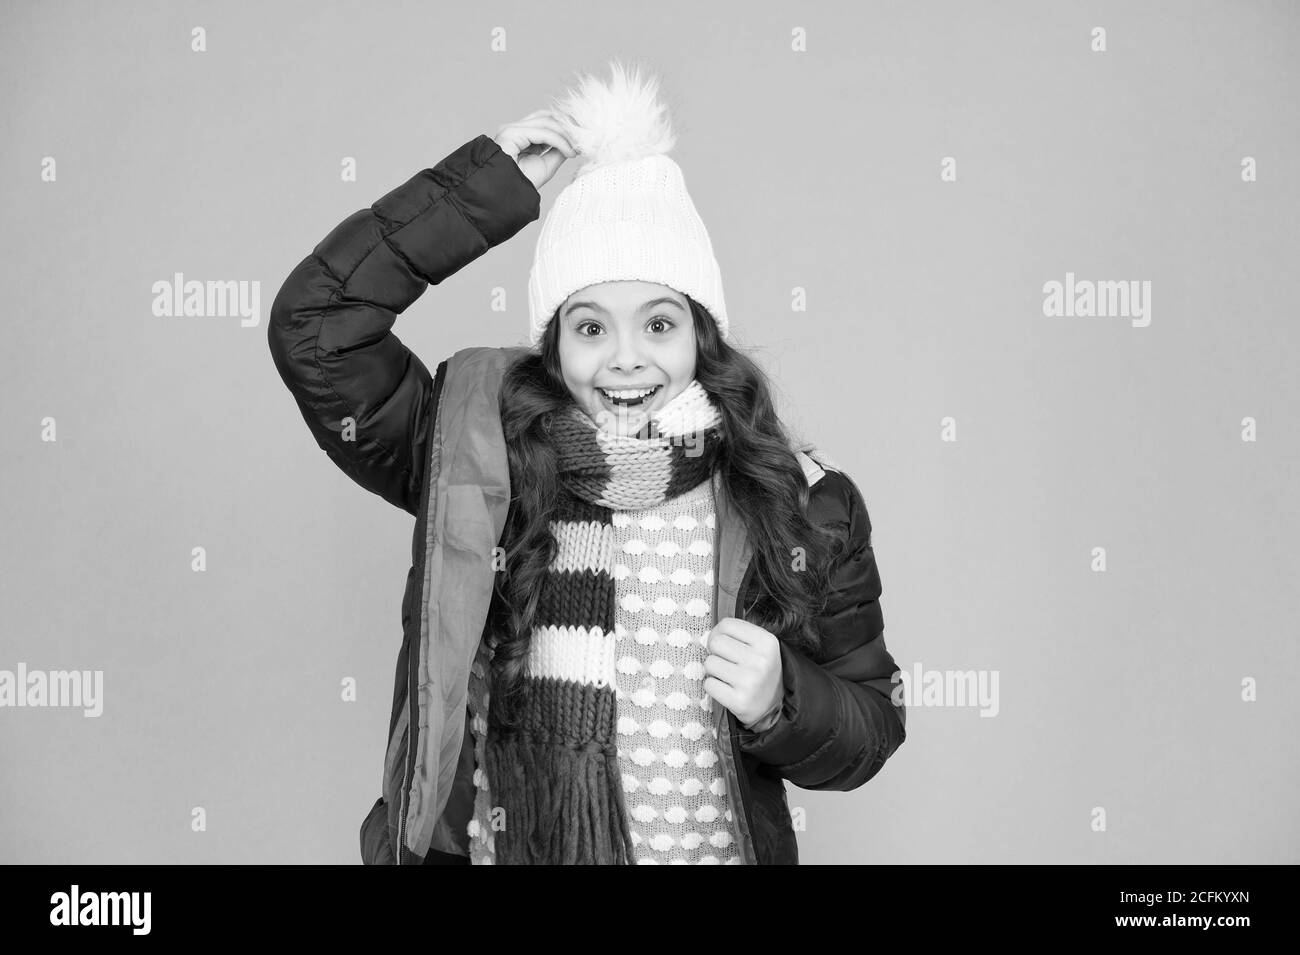 What a hat. Happy child wear warm hat. Little girl smile in pompom hat. Fashion accessory for winter. Fashion and style. Warm and stylish hat for cold weather. Stock Photo